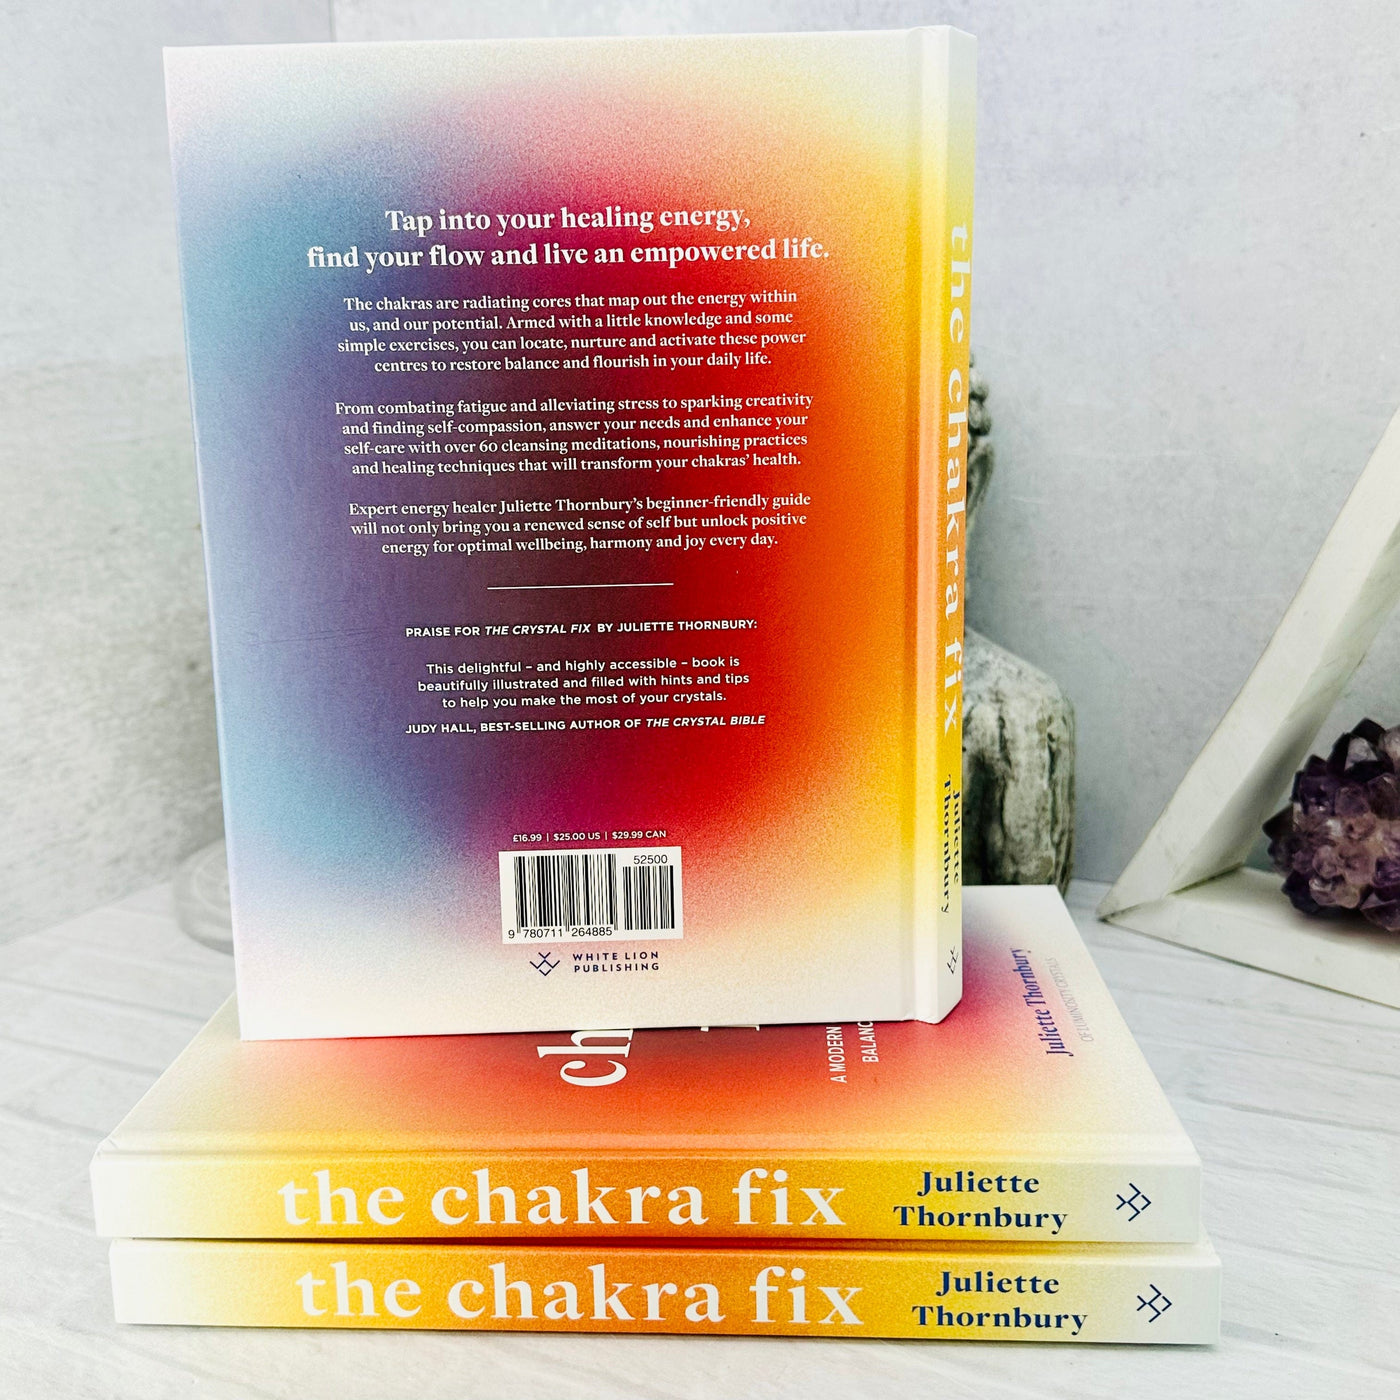 The Chakra Fix - back cover of book